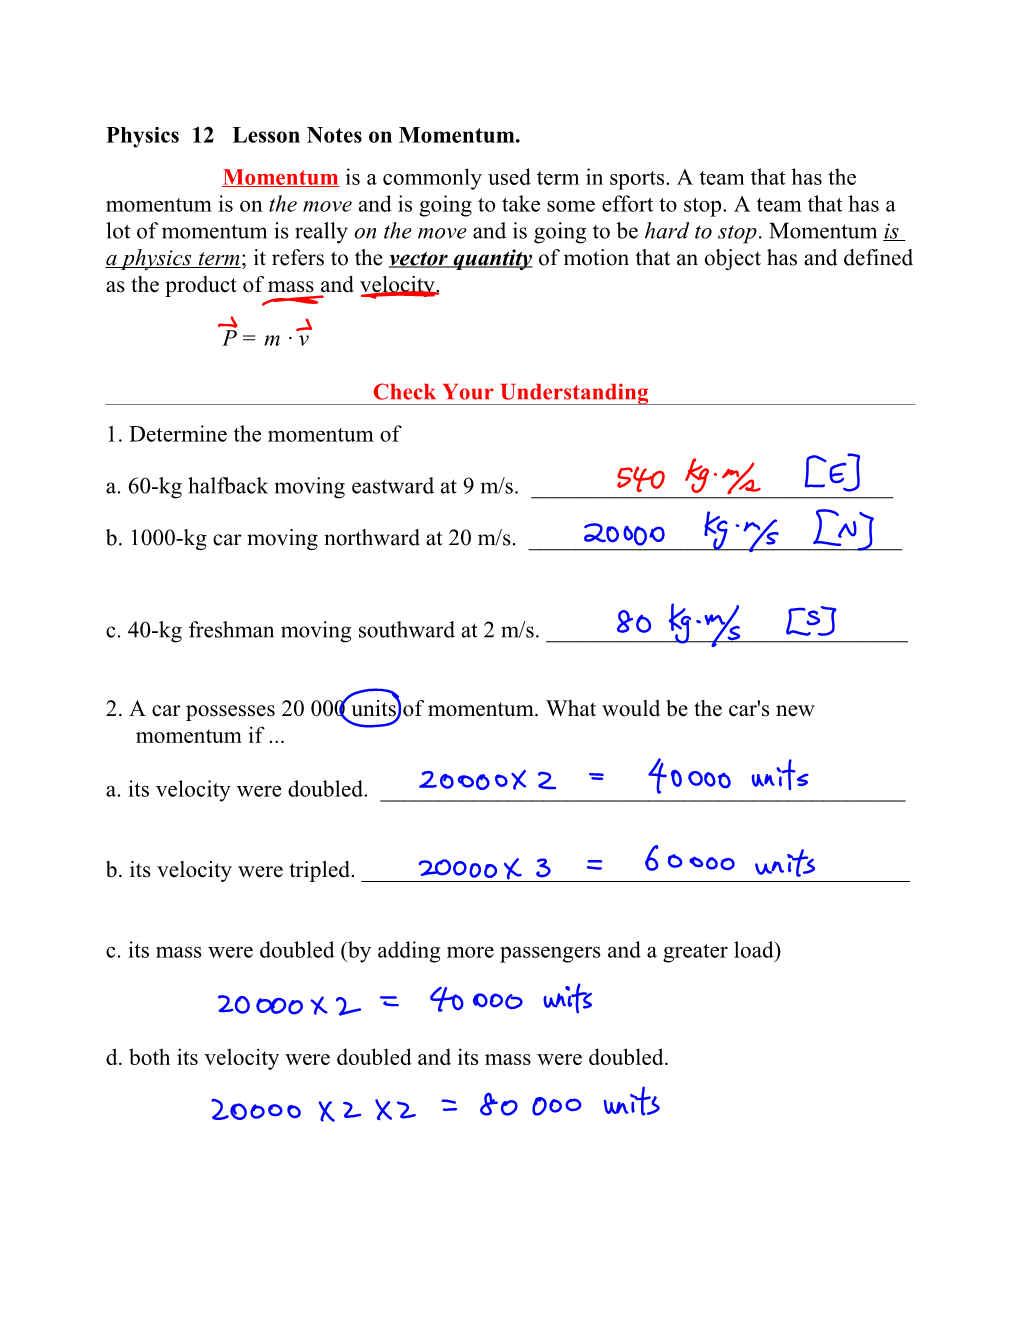 Physics 12 Lesson Notes on Momentum